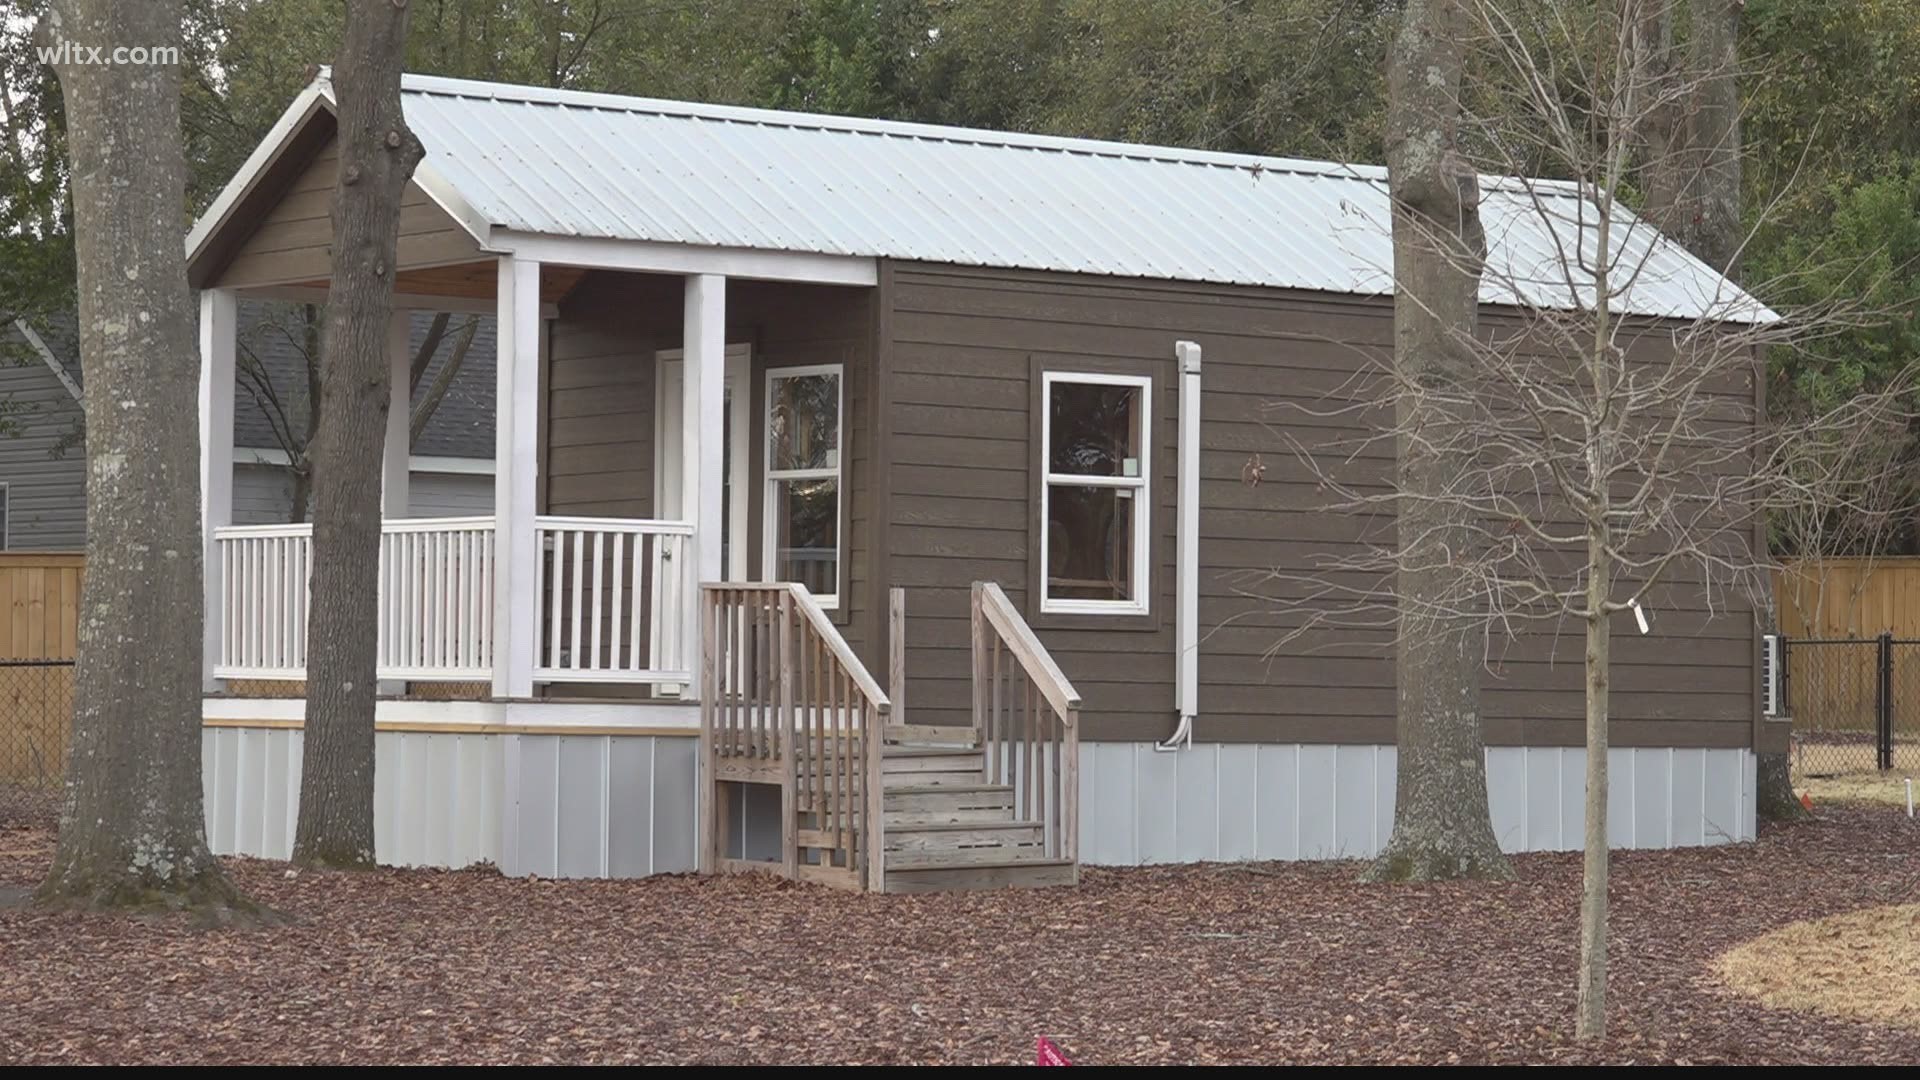 Many in SC are interested in living in smaller homes, about a 1,000 sq/ft smaller.